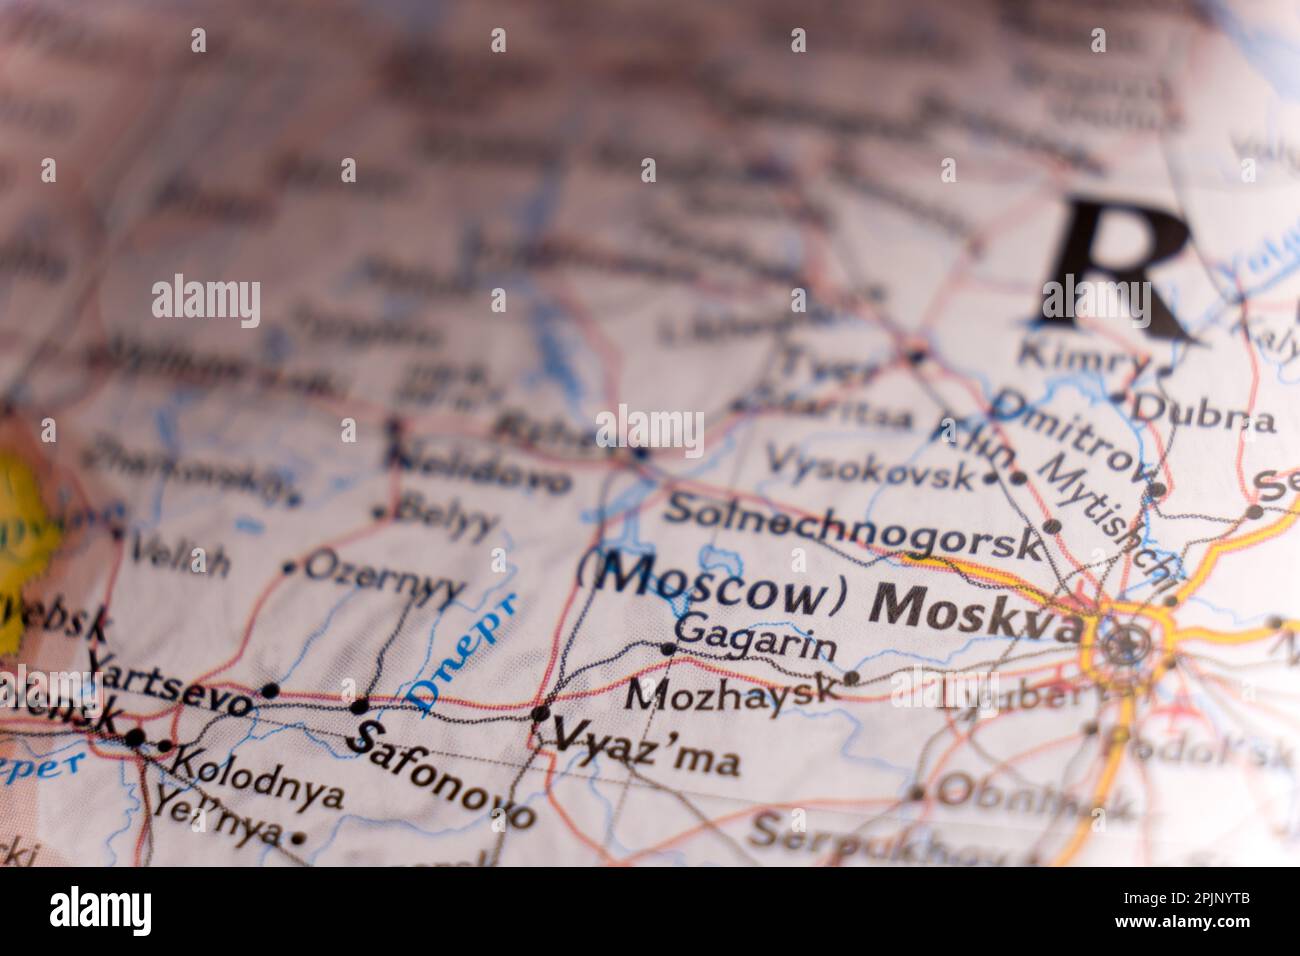 Focus on foreground of road map showing Moscow, Russia  Stock Photo